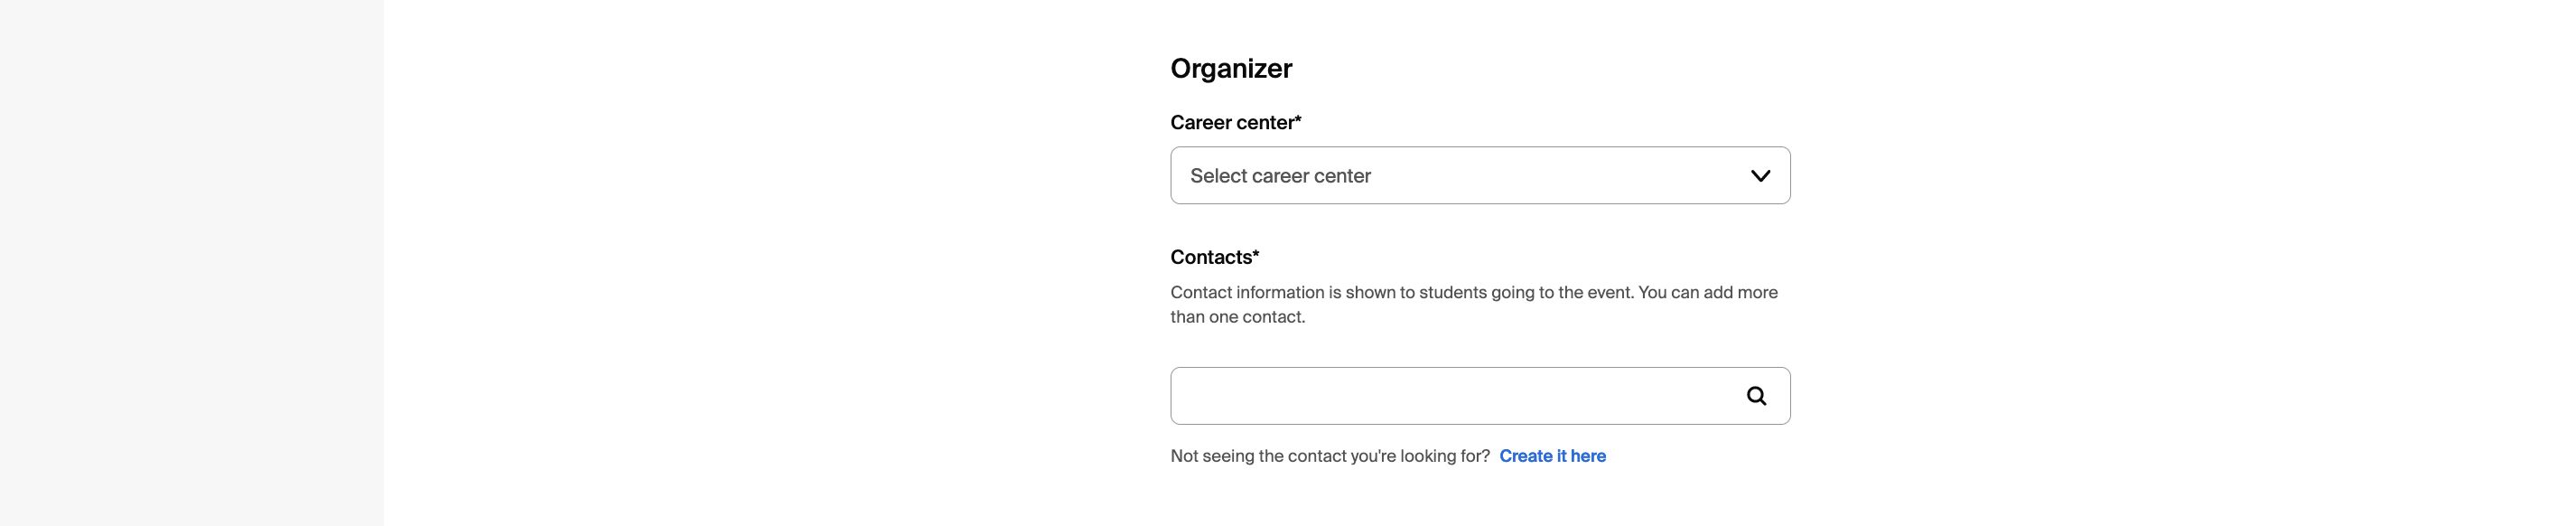 Organizer_and_Contact.png